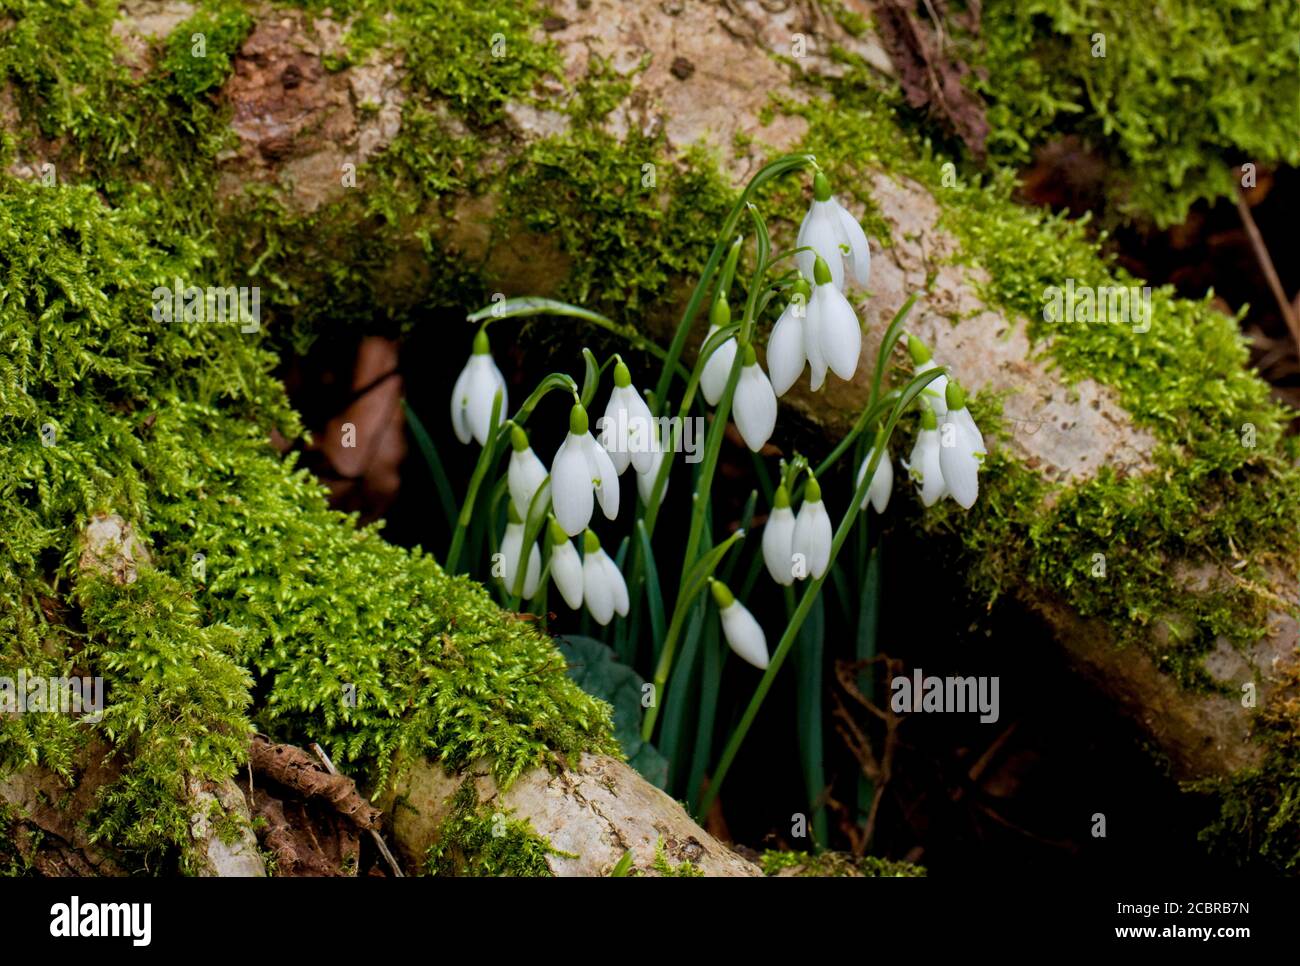 Snowdrops flowering in February, early spring in Southern England. Stock Photo